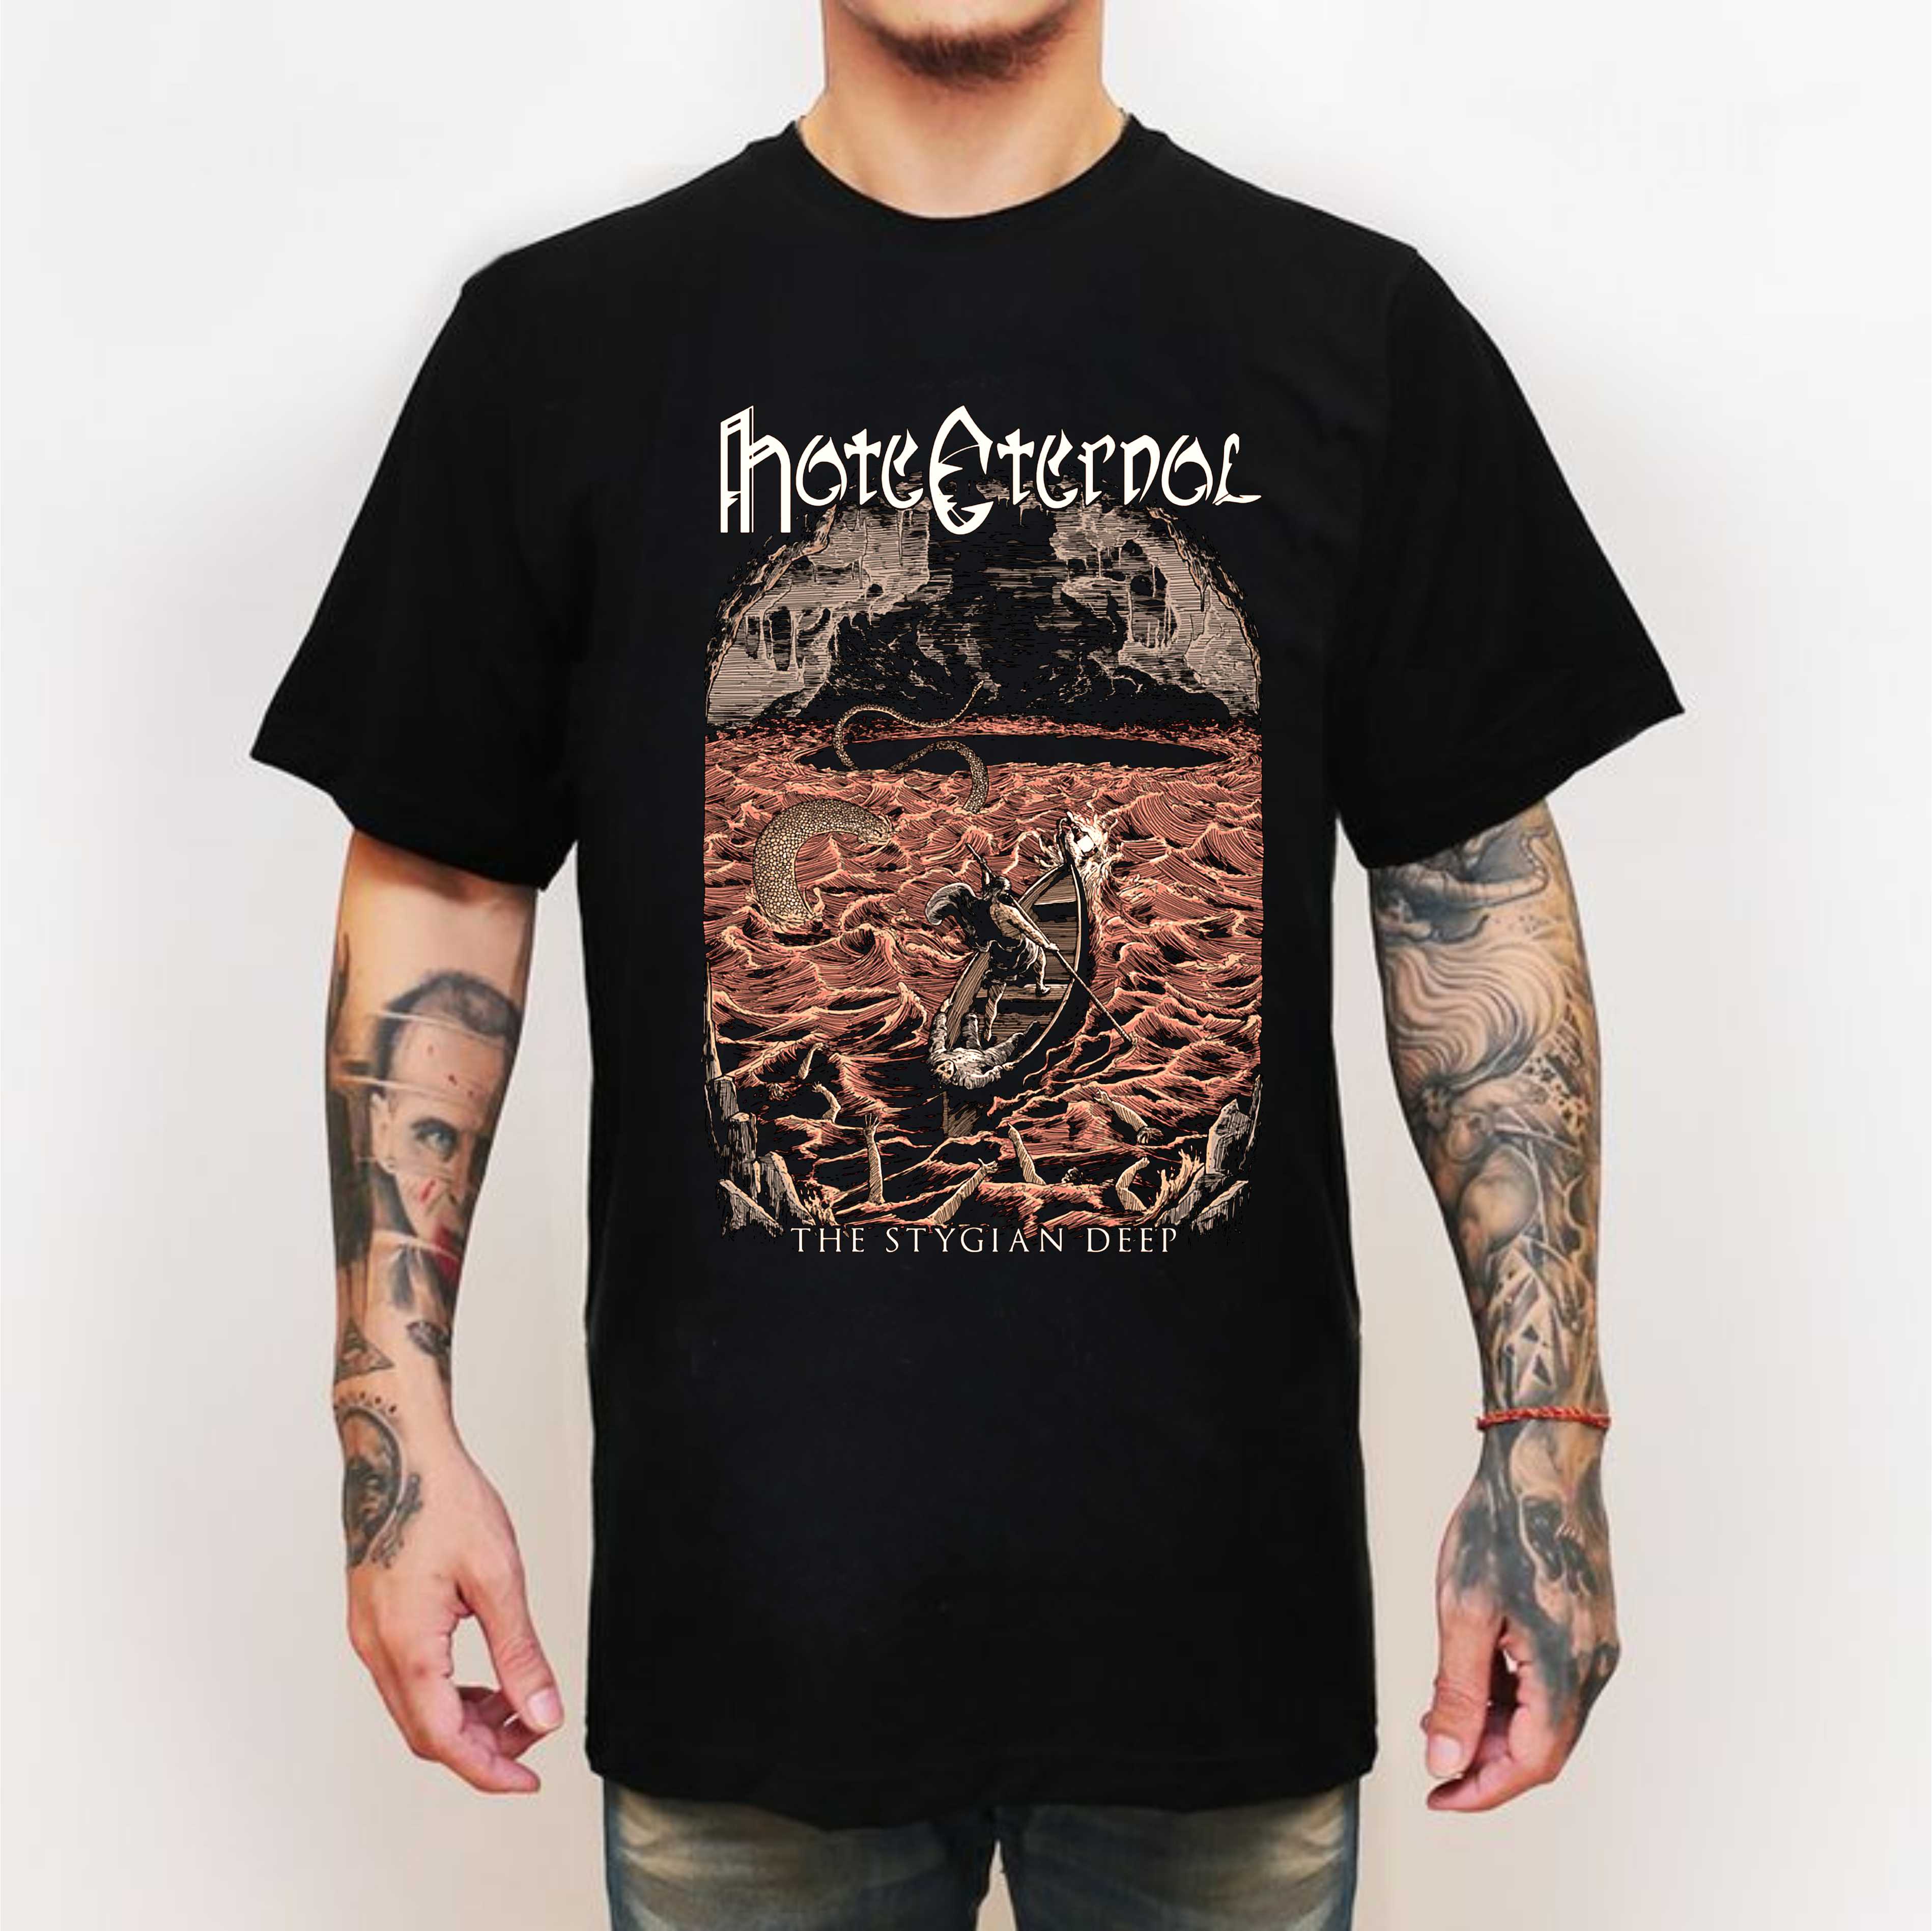 Hate Eternal Black T-Shirt – Metal & Rock T-shirts and Accessories